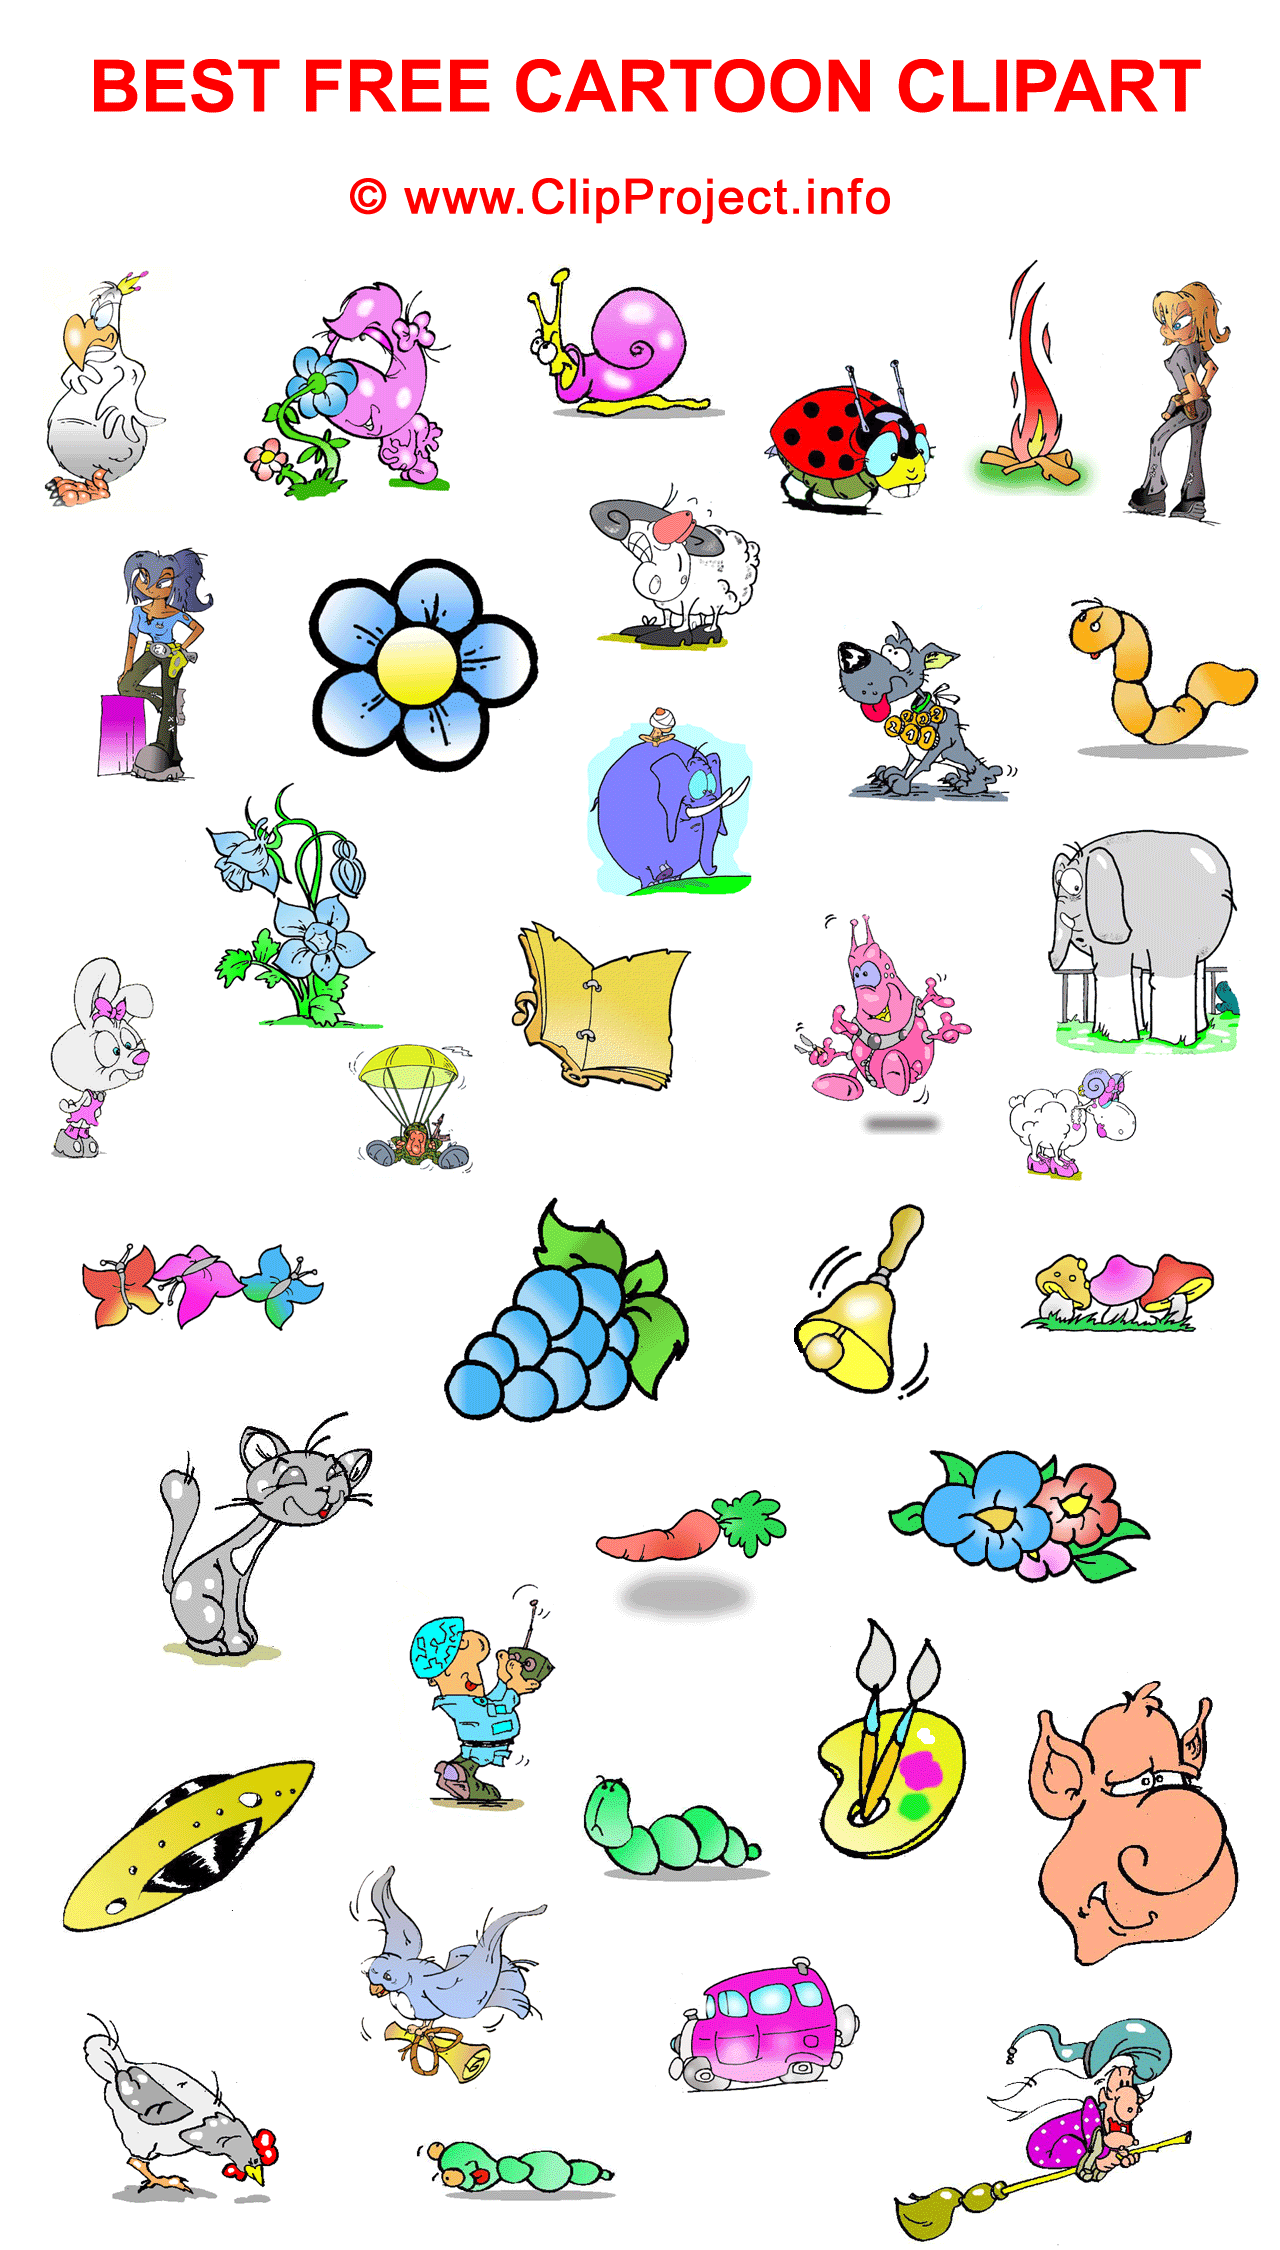 Cartoon clipart free, The best collection of cartoon clipart download free